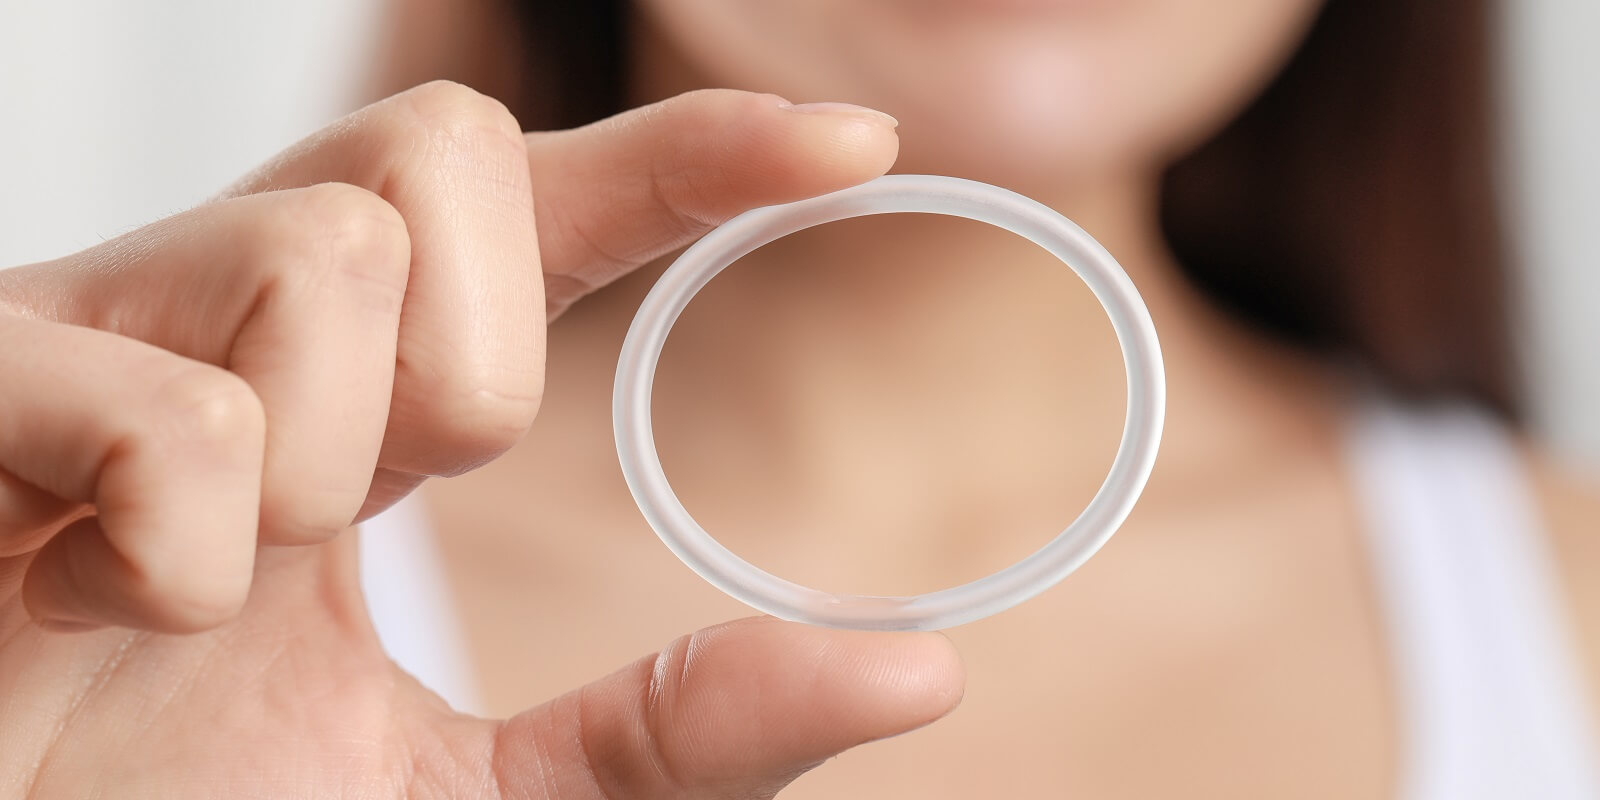 woman holding diaphragm vaginal contraceptive ring on blurred background